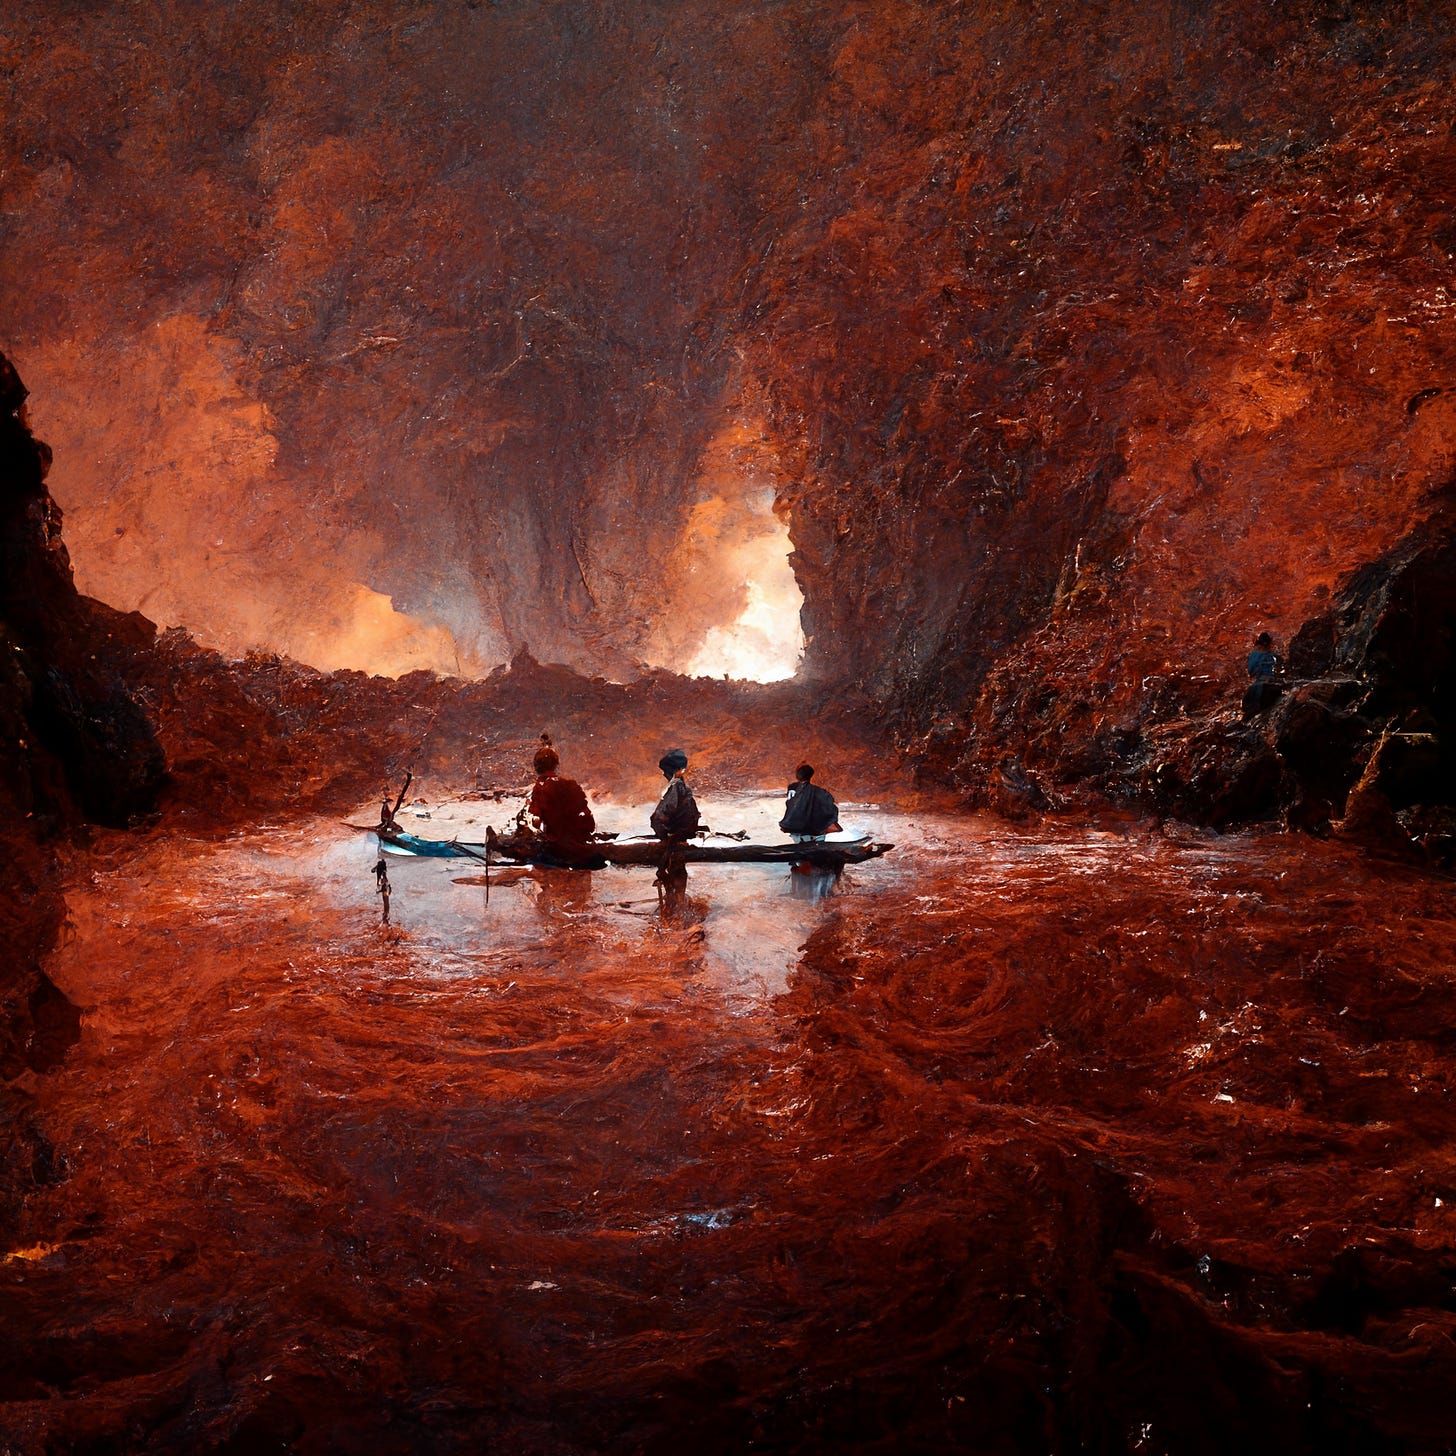 Tim Berners Lee paddling a canoe in a lava river with elon musk and mark zuckerberg via Midjourney AI